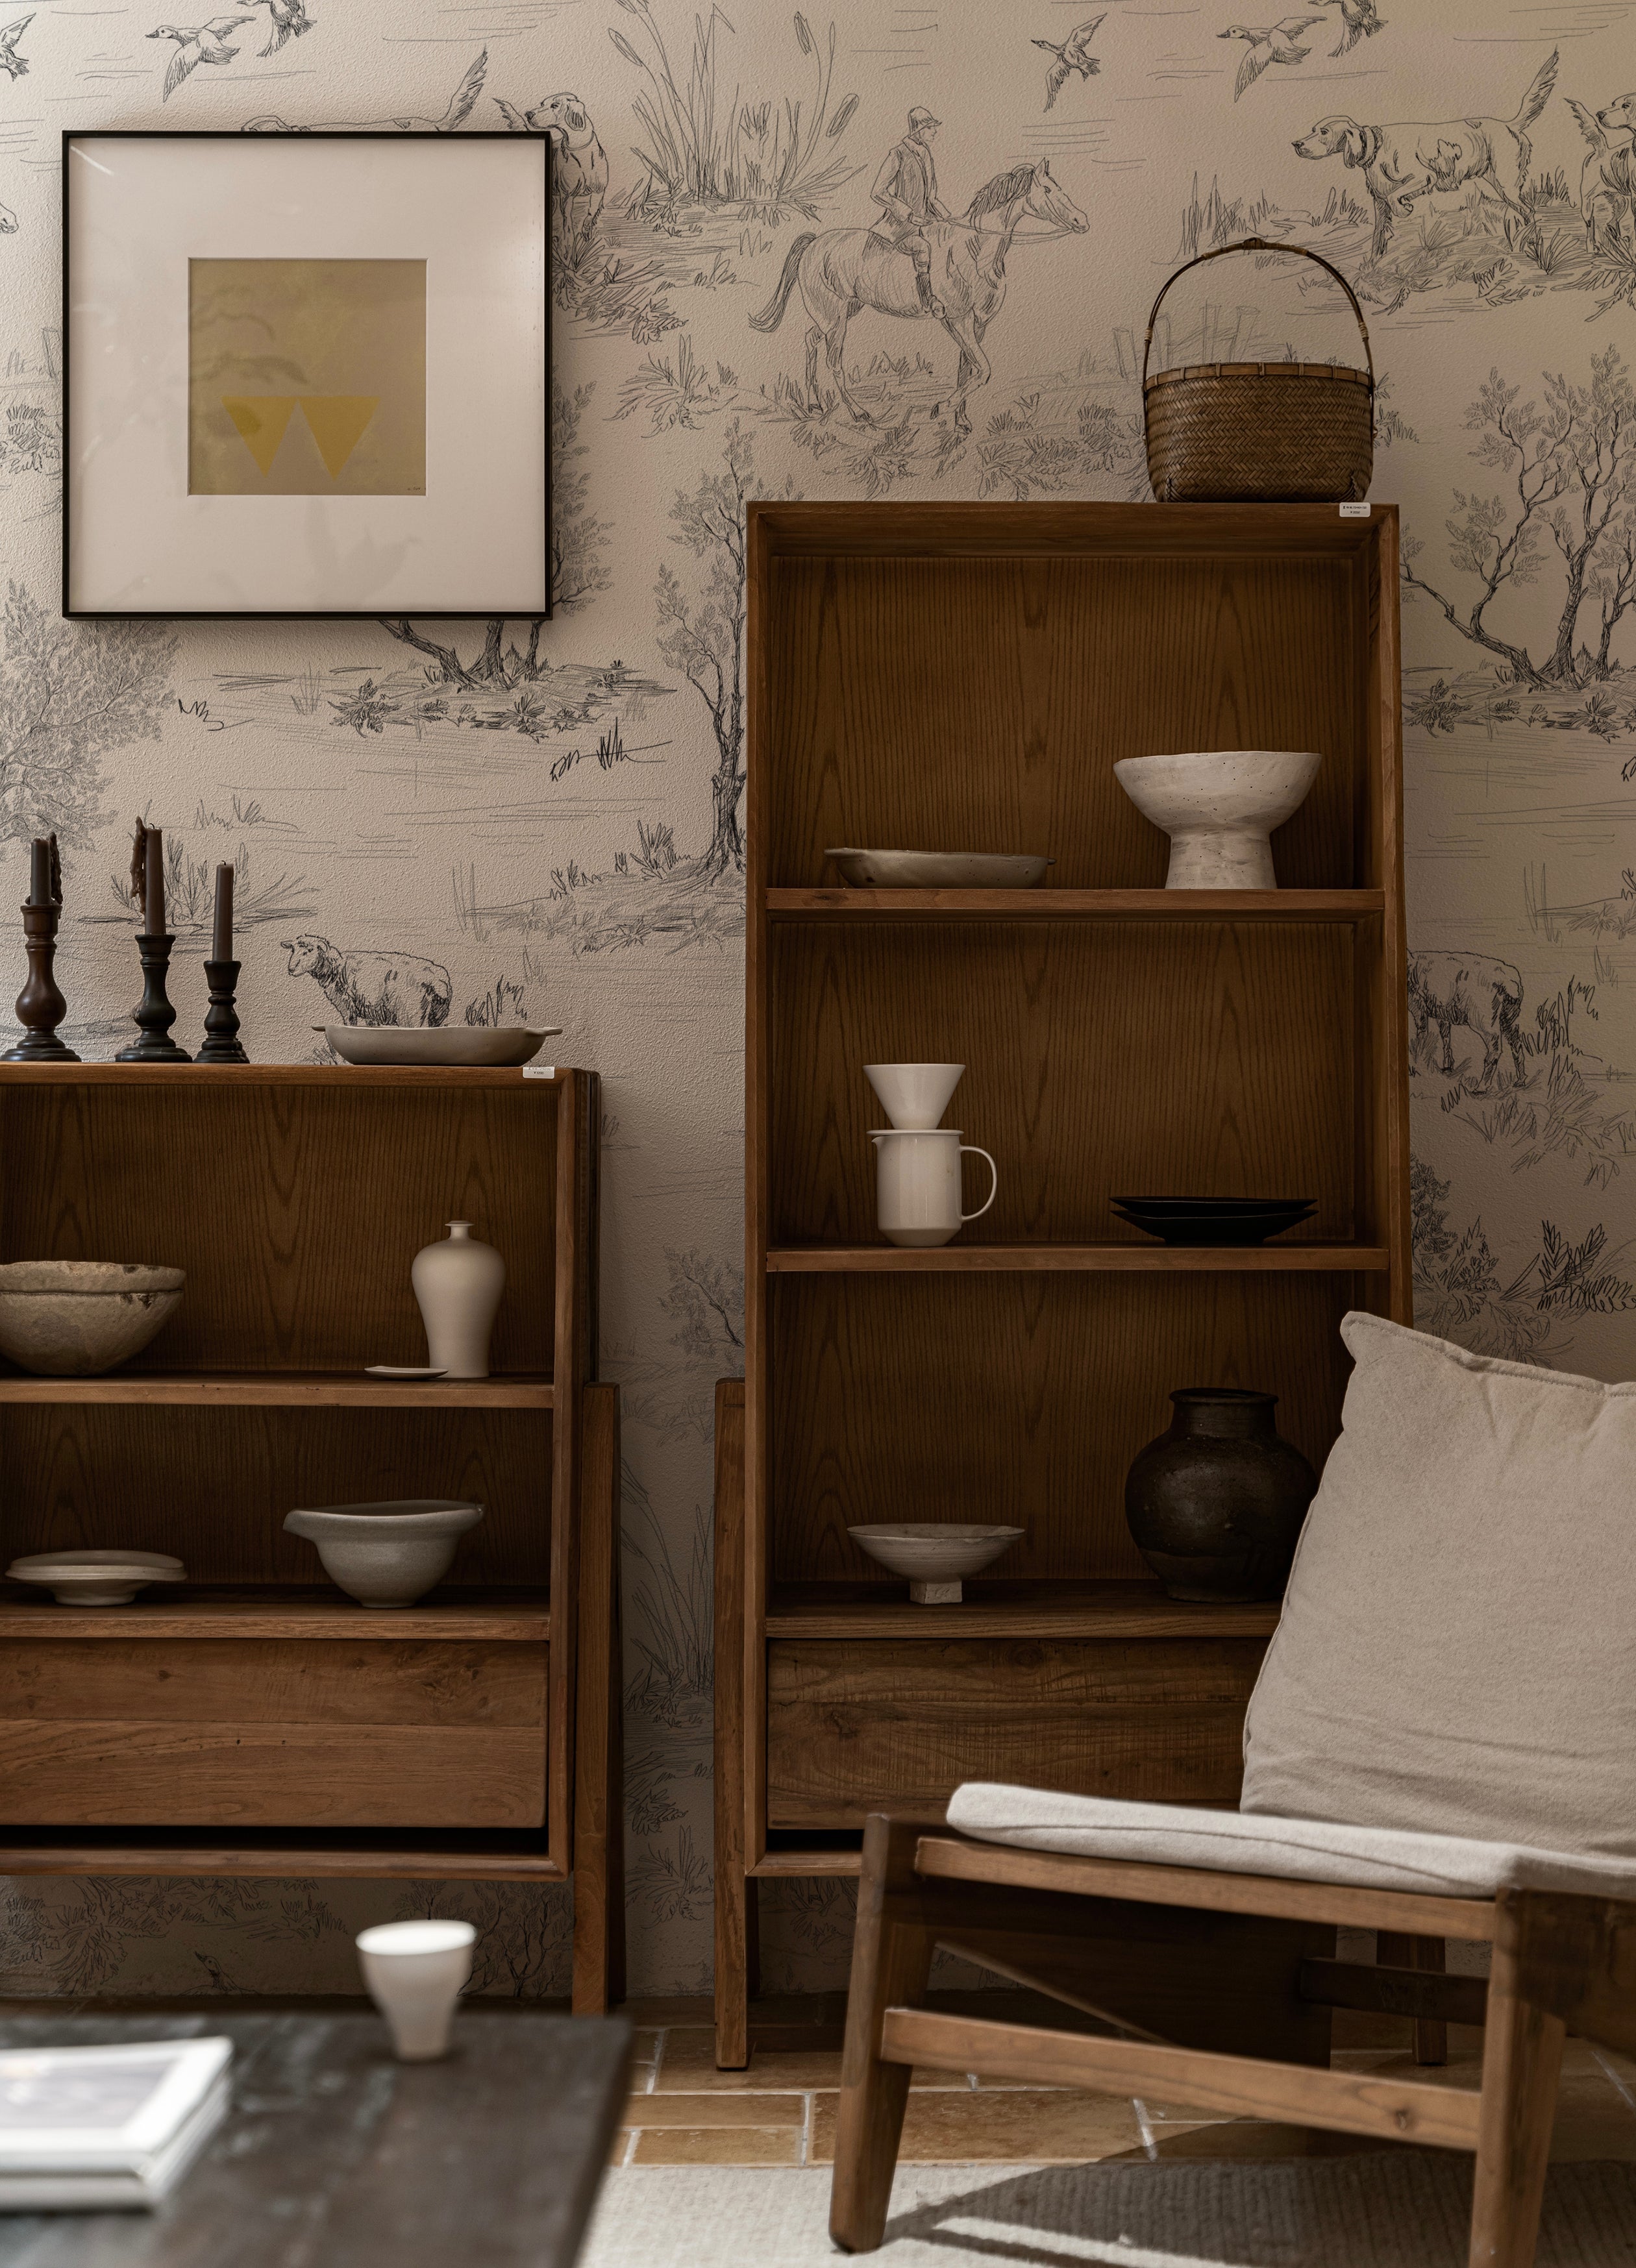 A rustic wooden bookcase against a backdrop of Outdoor Friend Sketch Wallpaper, featuring detailed sketches of outdoor scenes with hunters, dogs, and wildlife in a monochrome style. The decor includes various ceramic and wooden items, enhancing the naturalistic theme